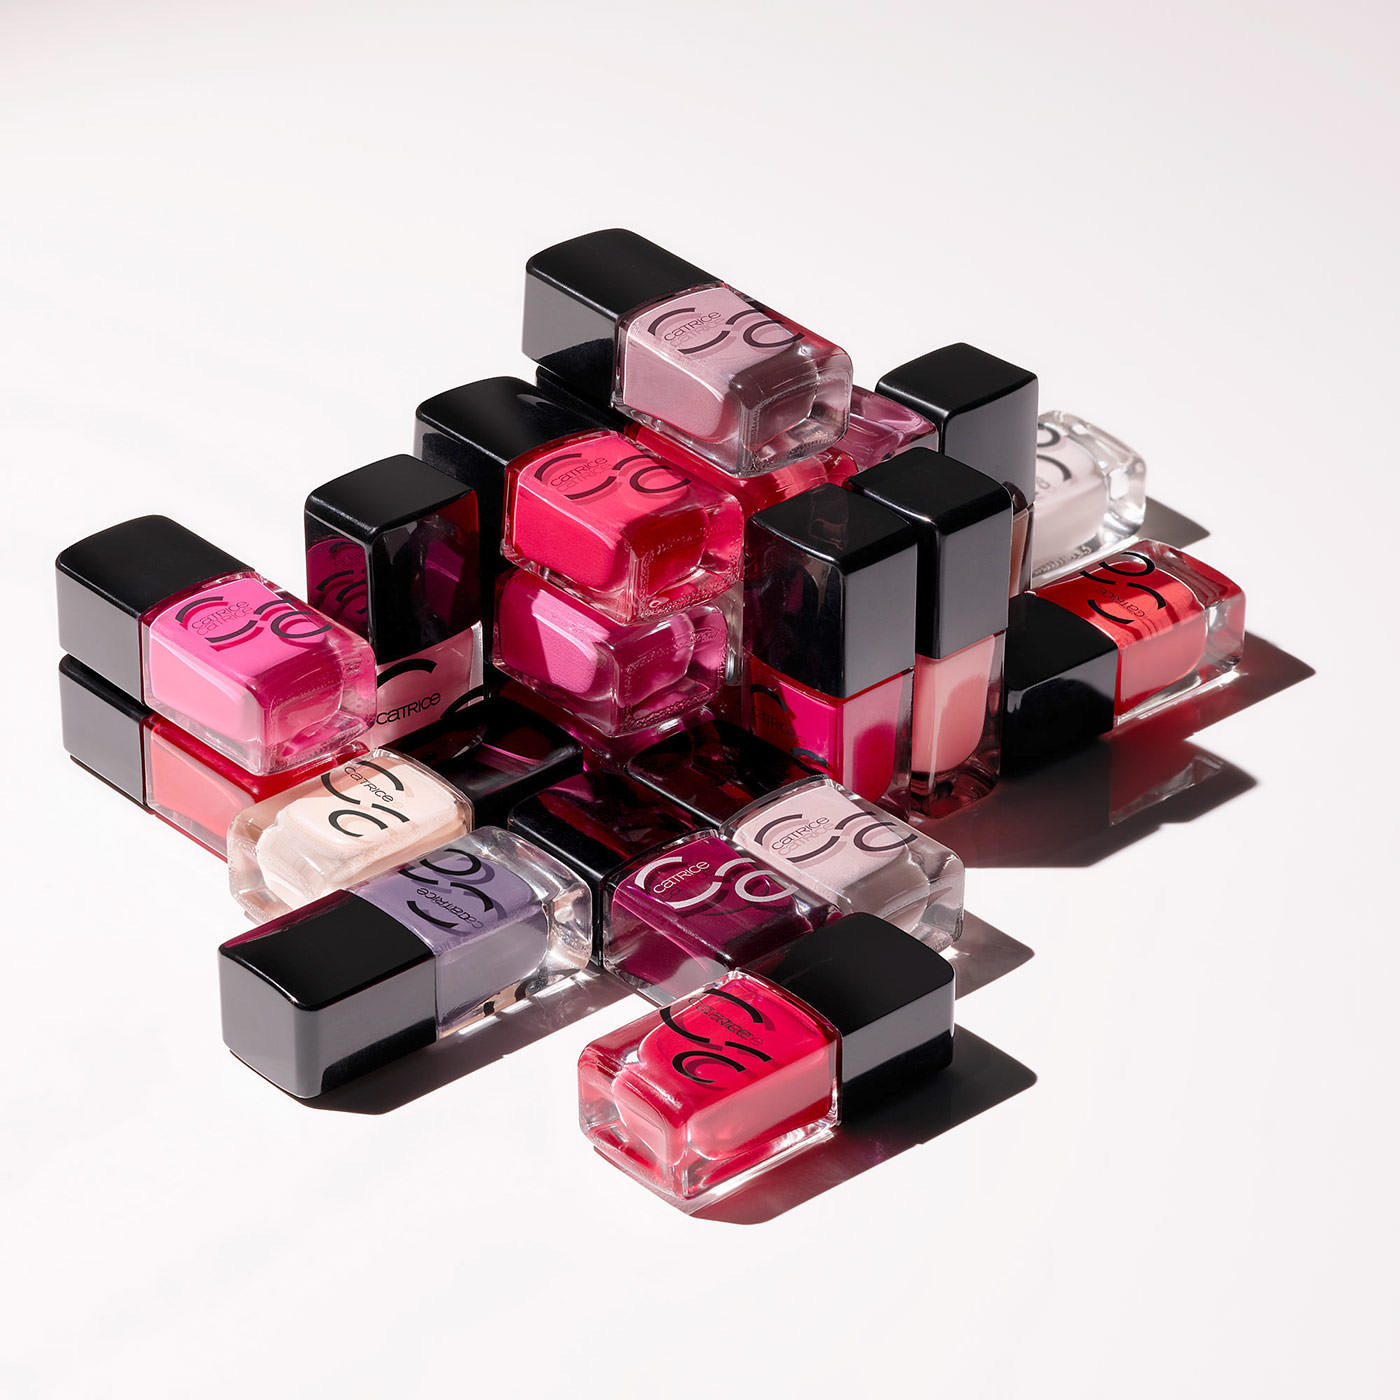 Nail polish display photography • Marc Wuchner • Cosmetic and Texture Photographer